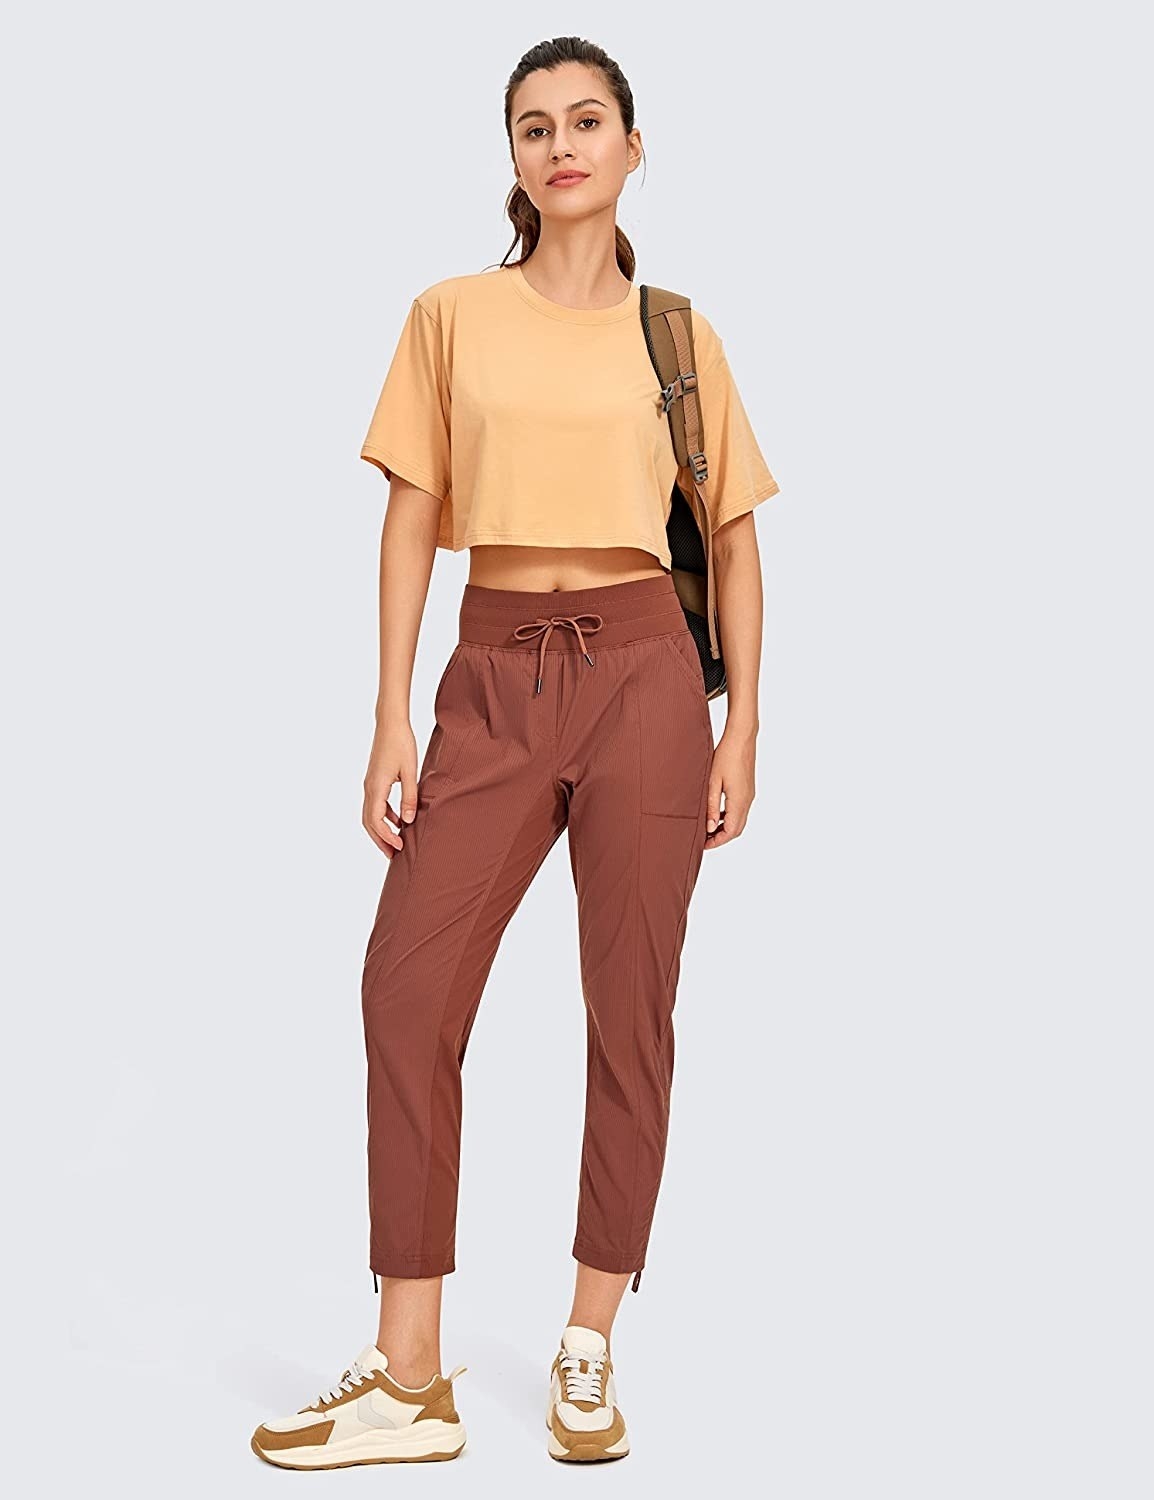 a model wearing the brown pants